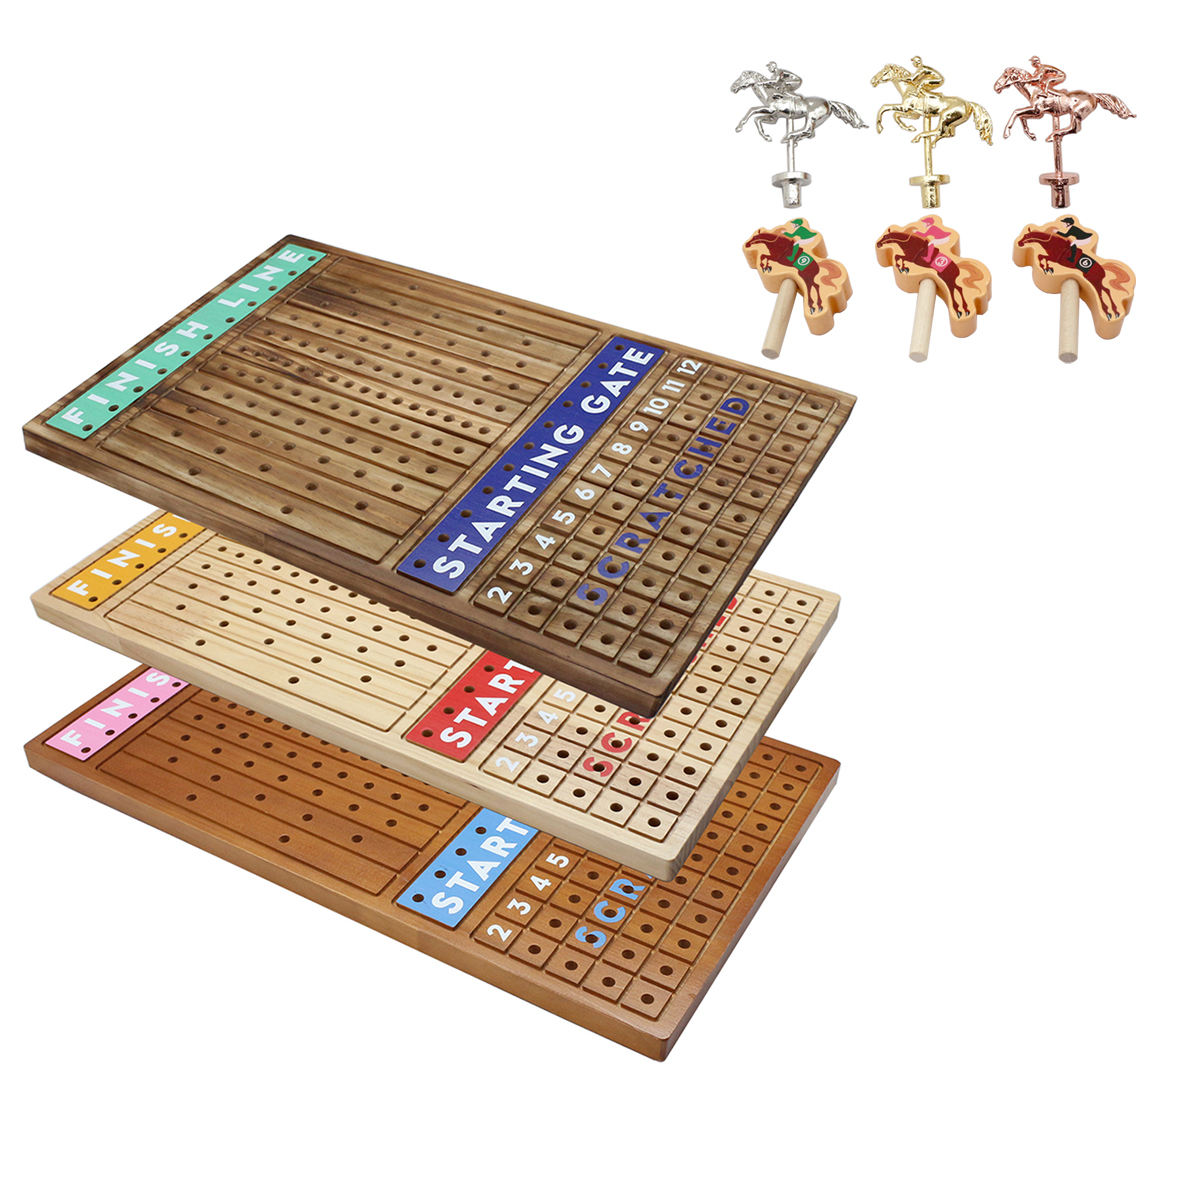 15 inches Solid Wood with 11 Metal Horses with 2 Dice and 2 Cards Finish Line Horse Racing Game Horse Race Board